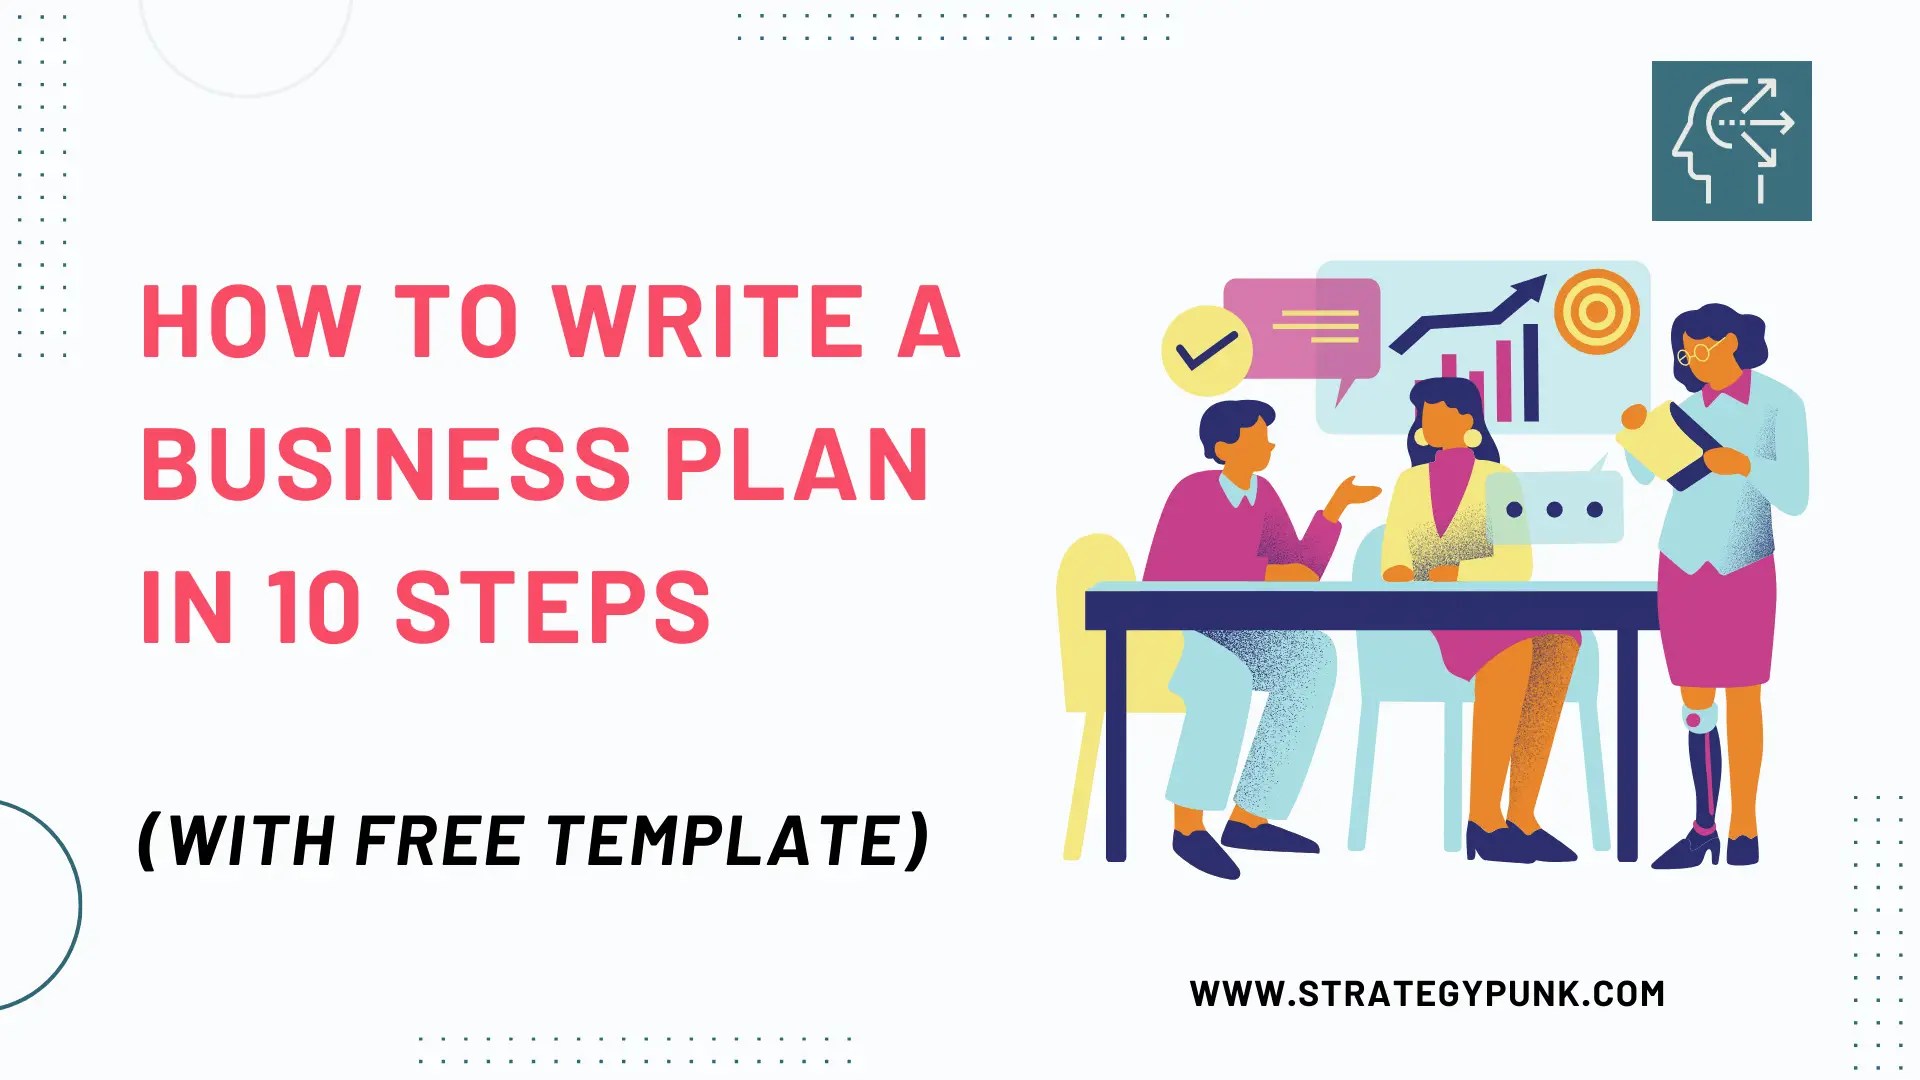 Writing A Business Plan Template Free